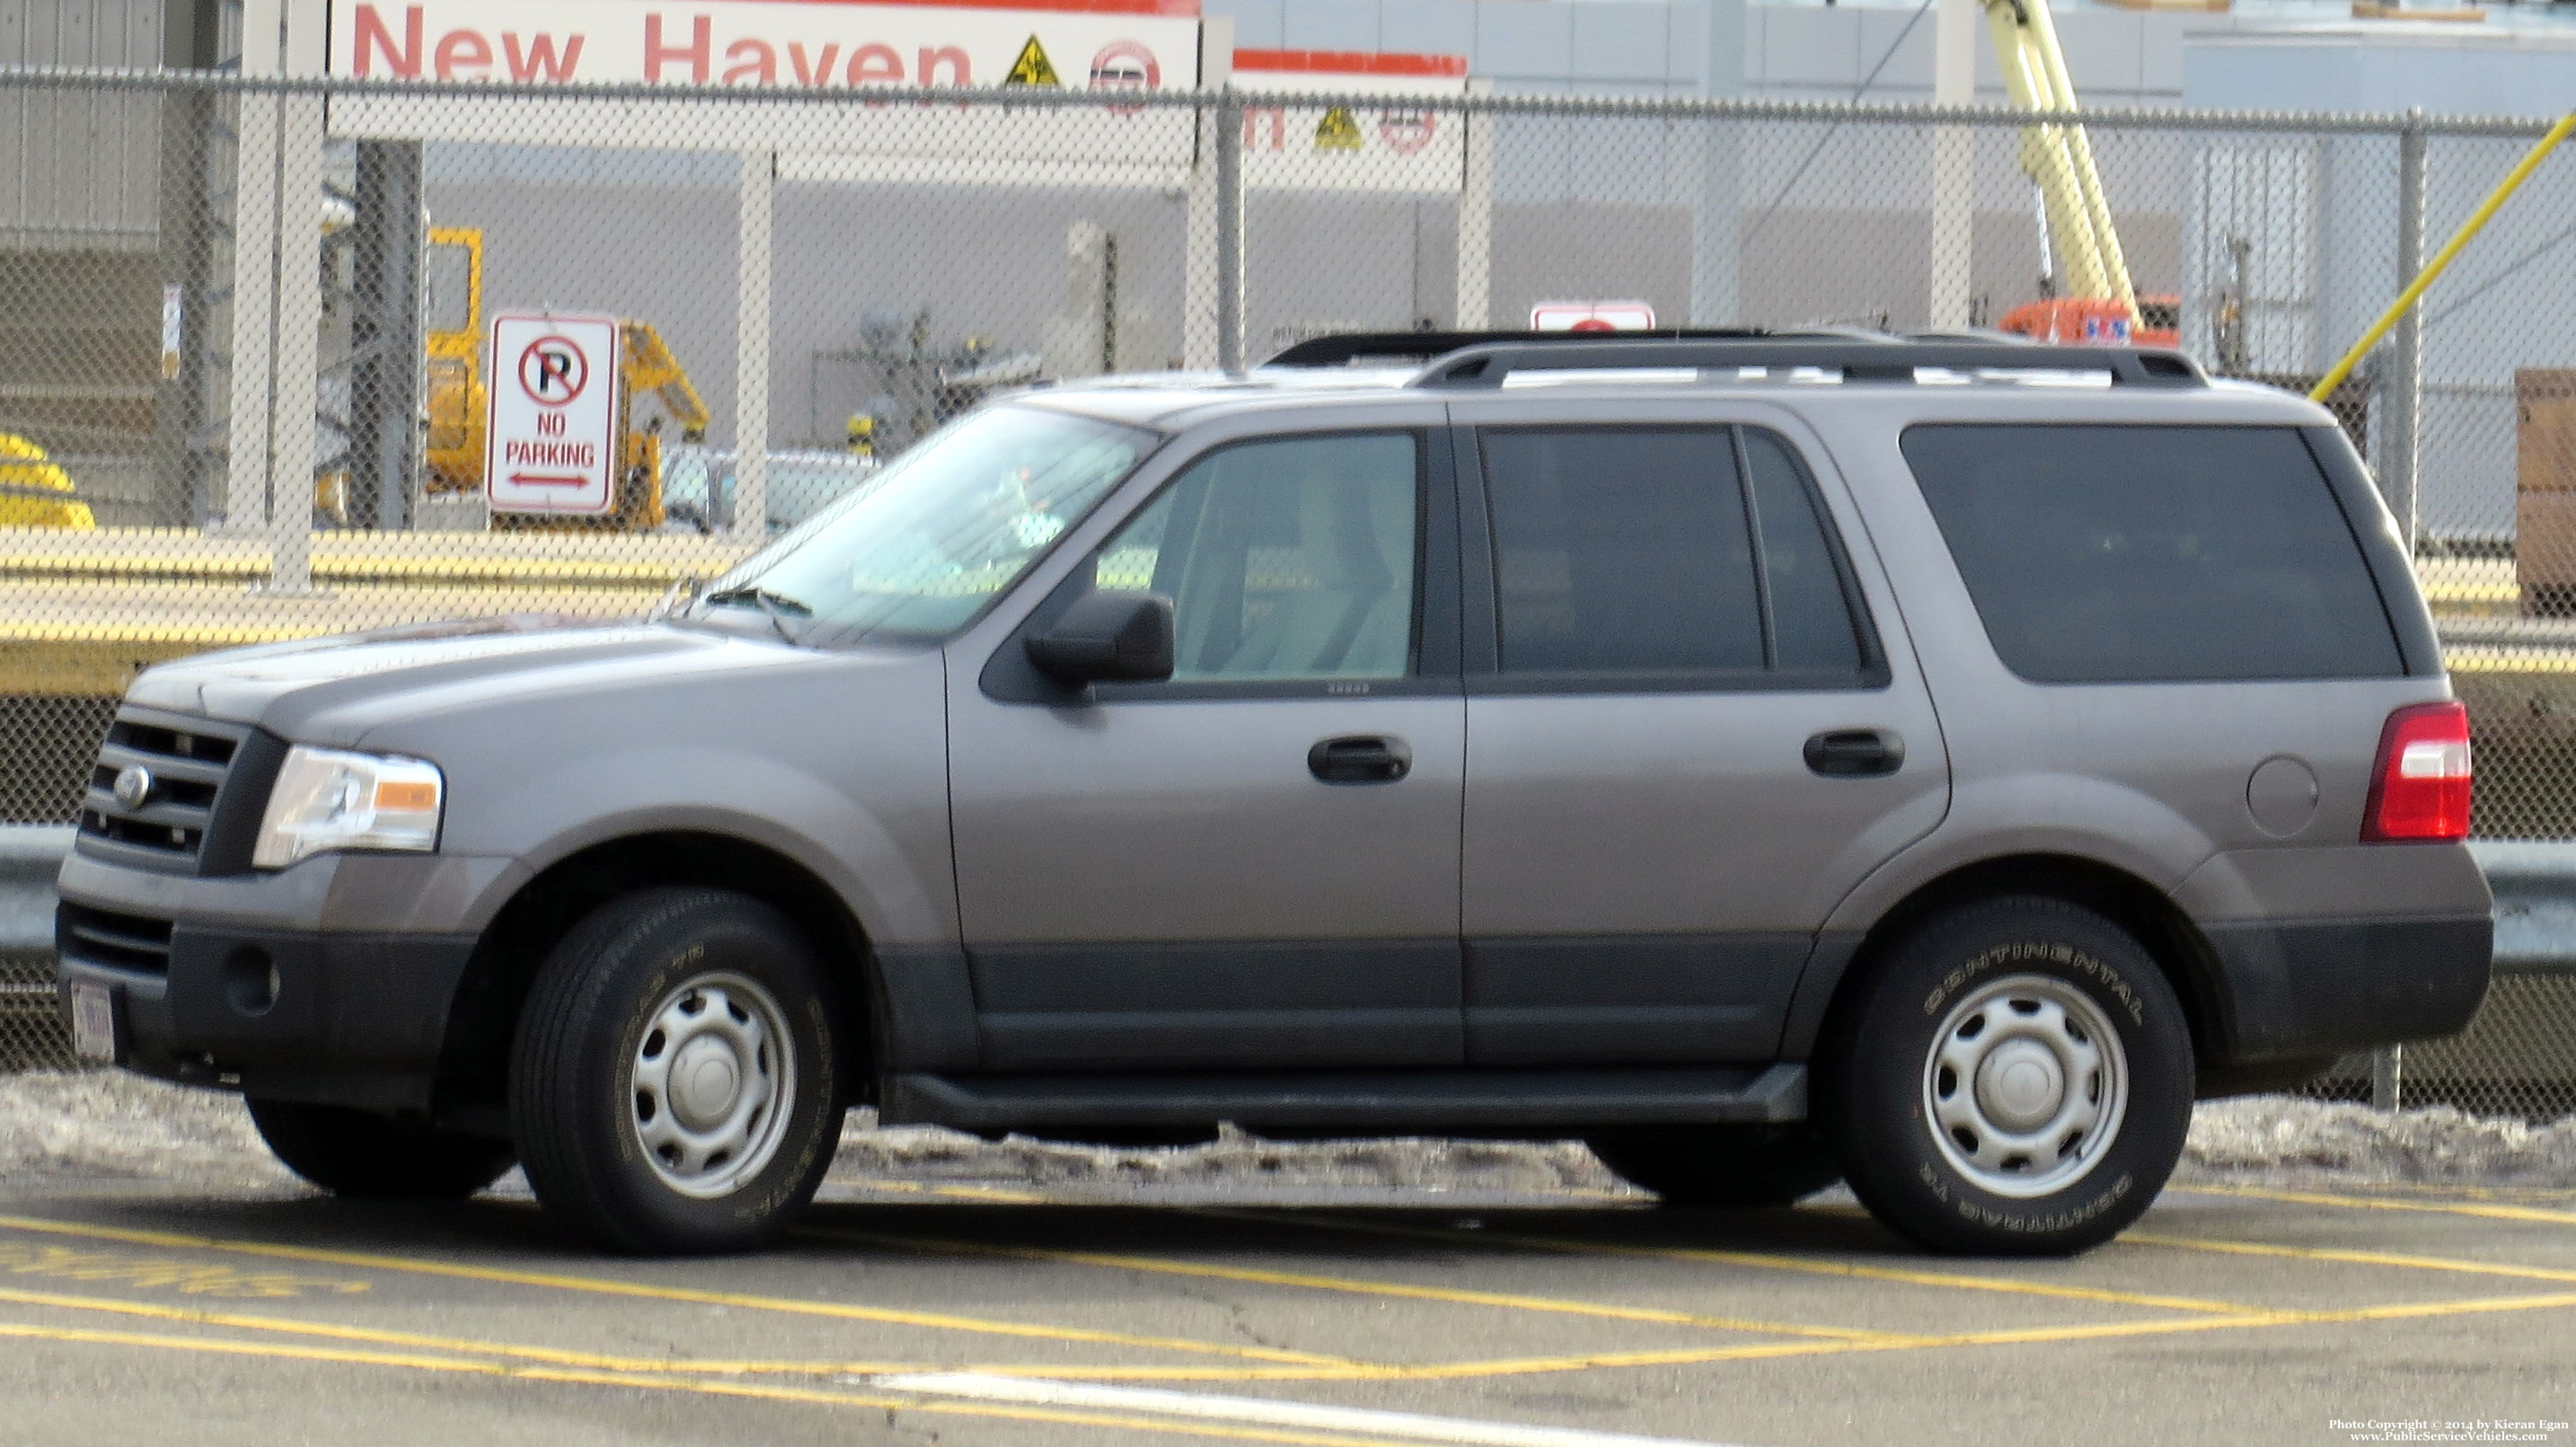 A photo  of Amtrak Police
            Unmarked Unit, a 2007-2014 Ford Expedition             taken by Kieran Egan